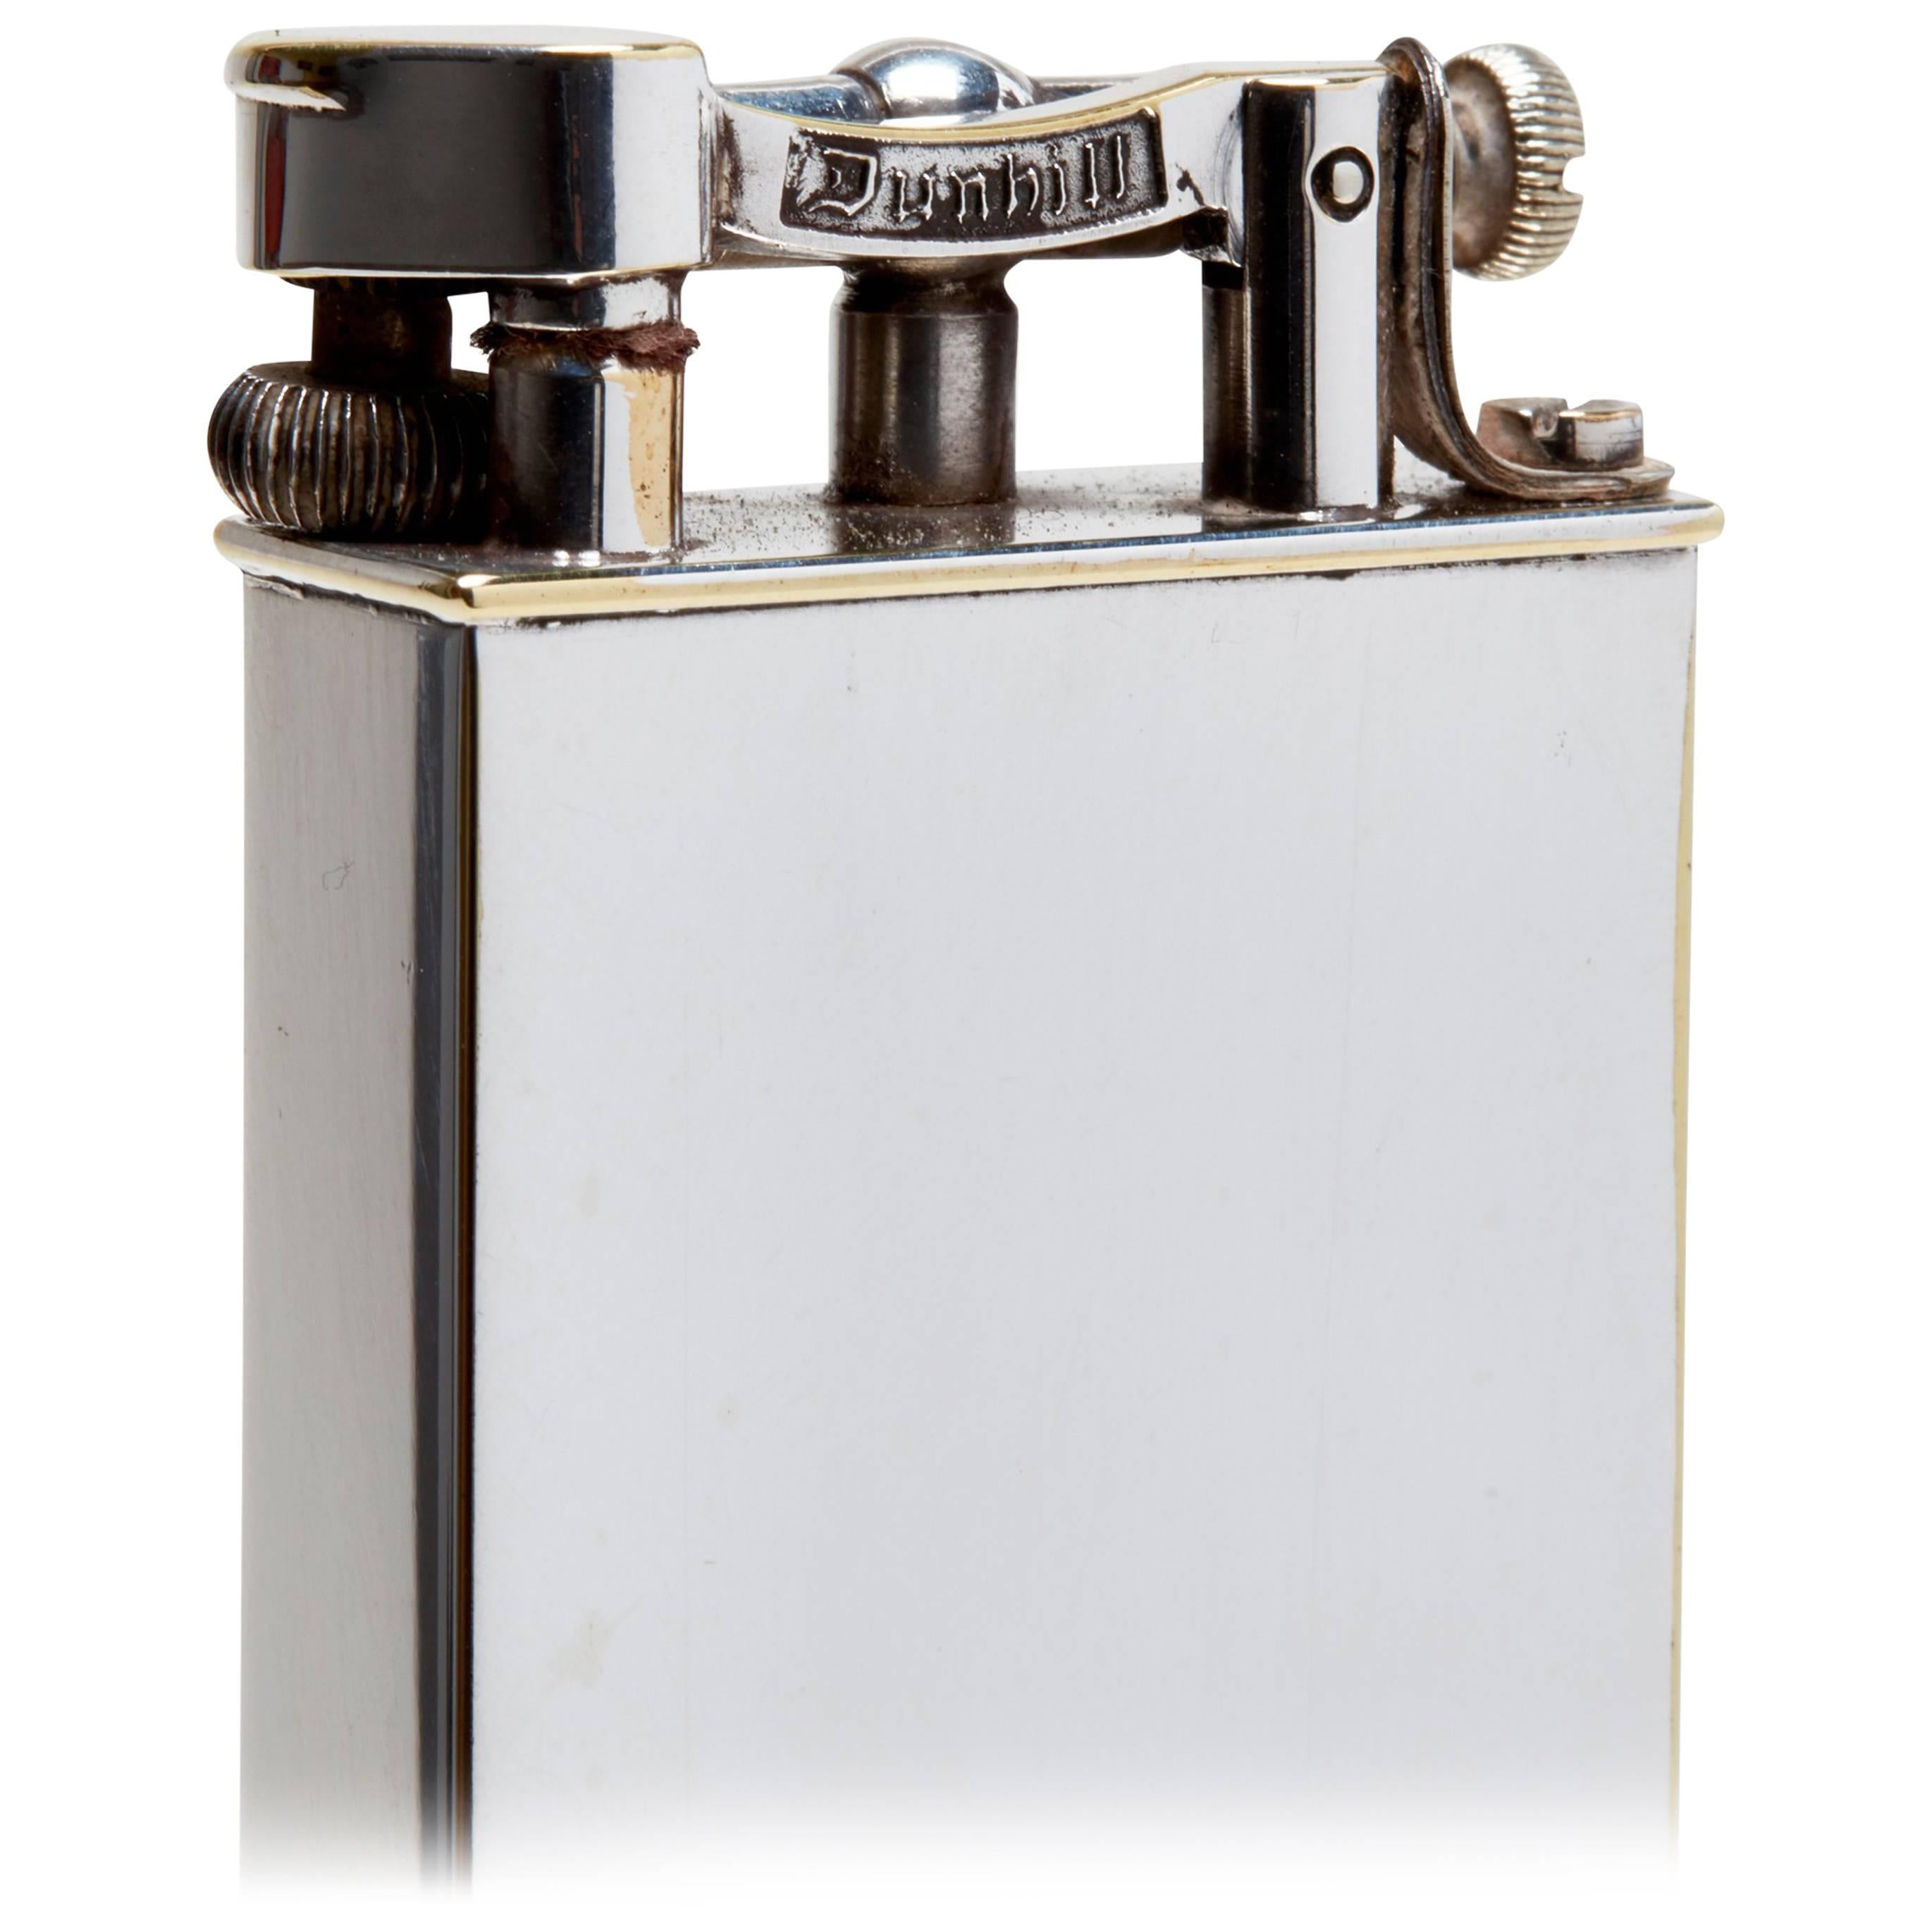 Dunhill Table Lighter For Sale